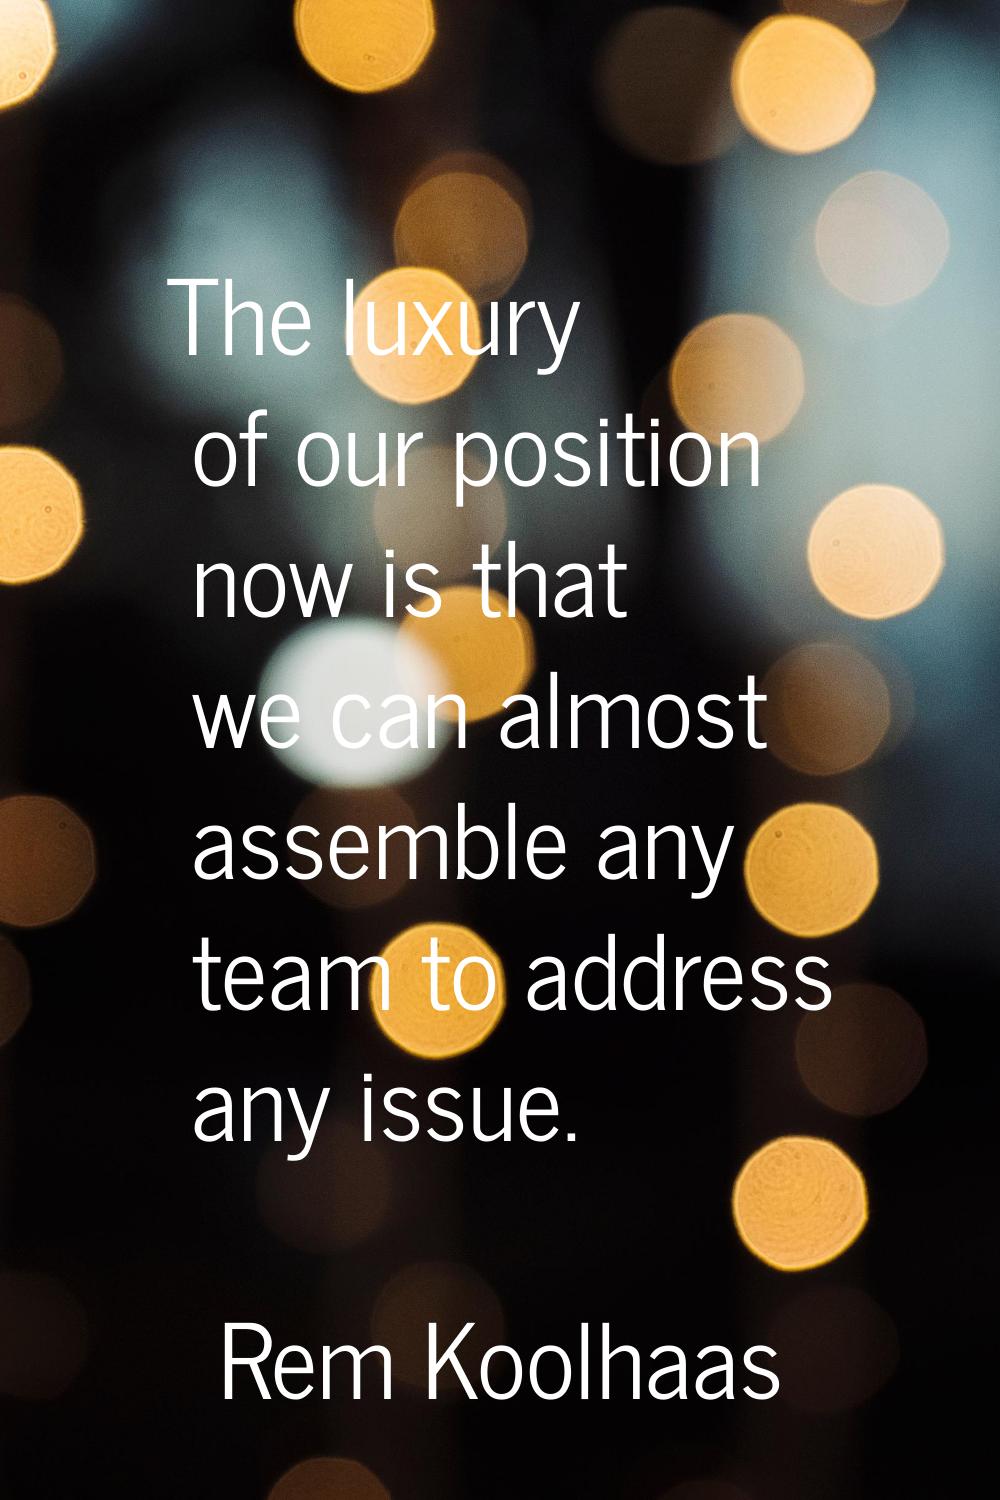 The luxury of our position now is that we can almost assemble any team to address any issue.